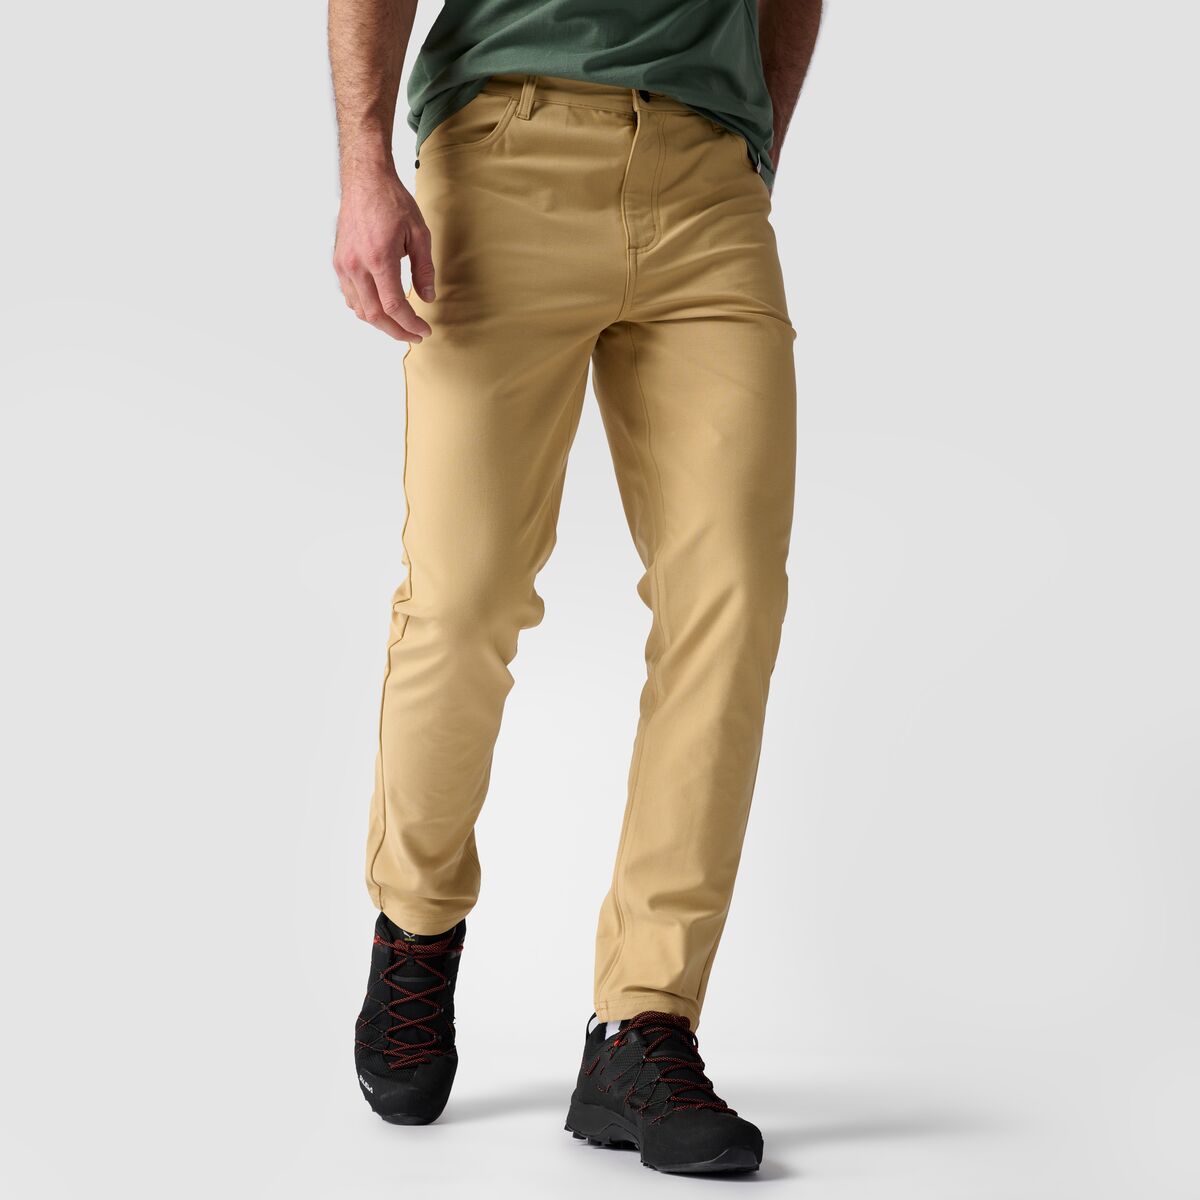 Backcountry Basis Everyday Pant - Men's